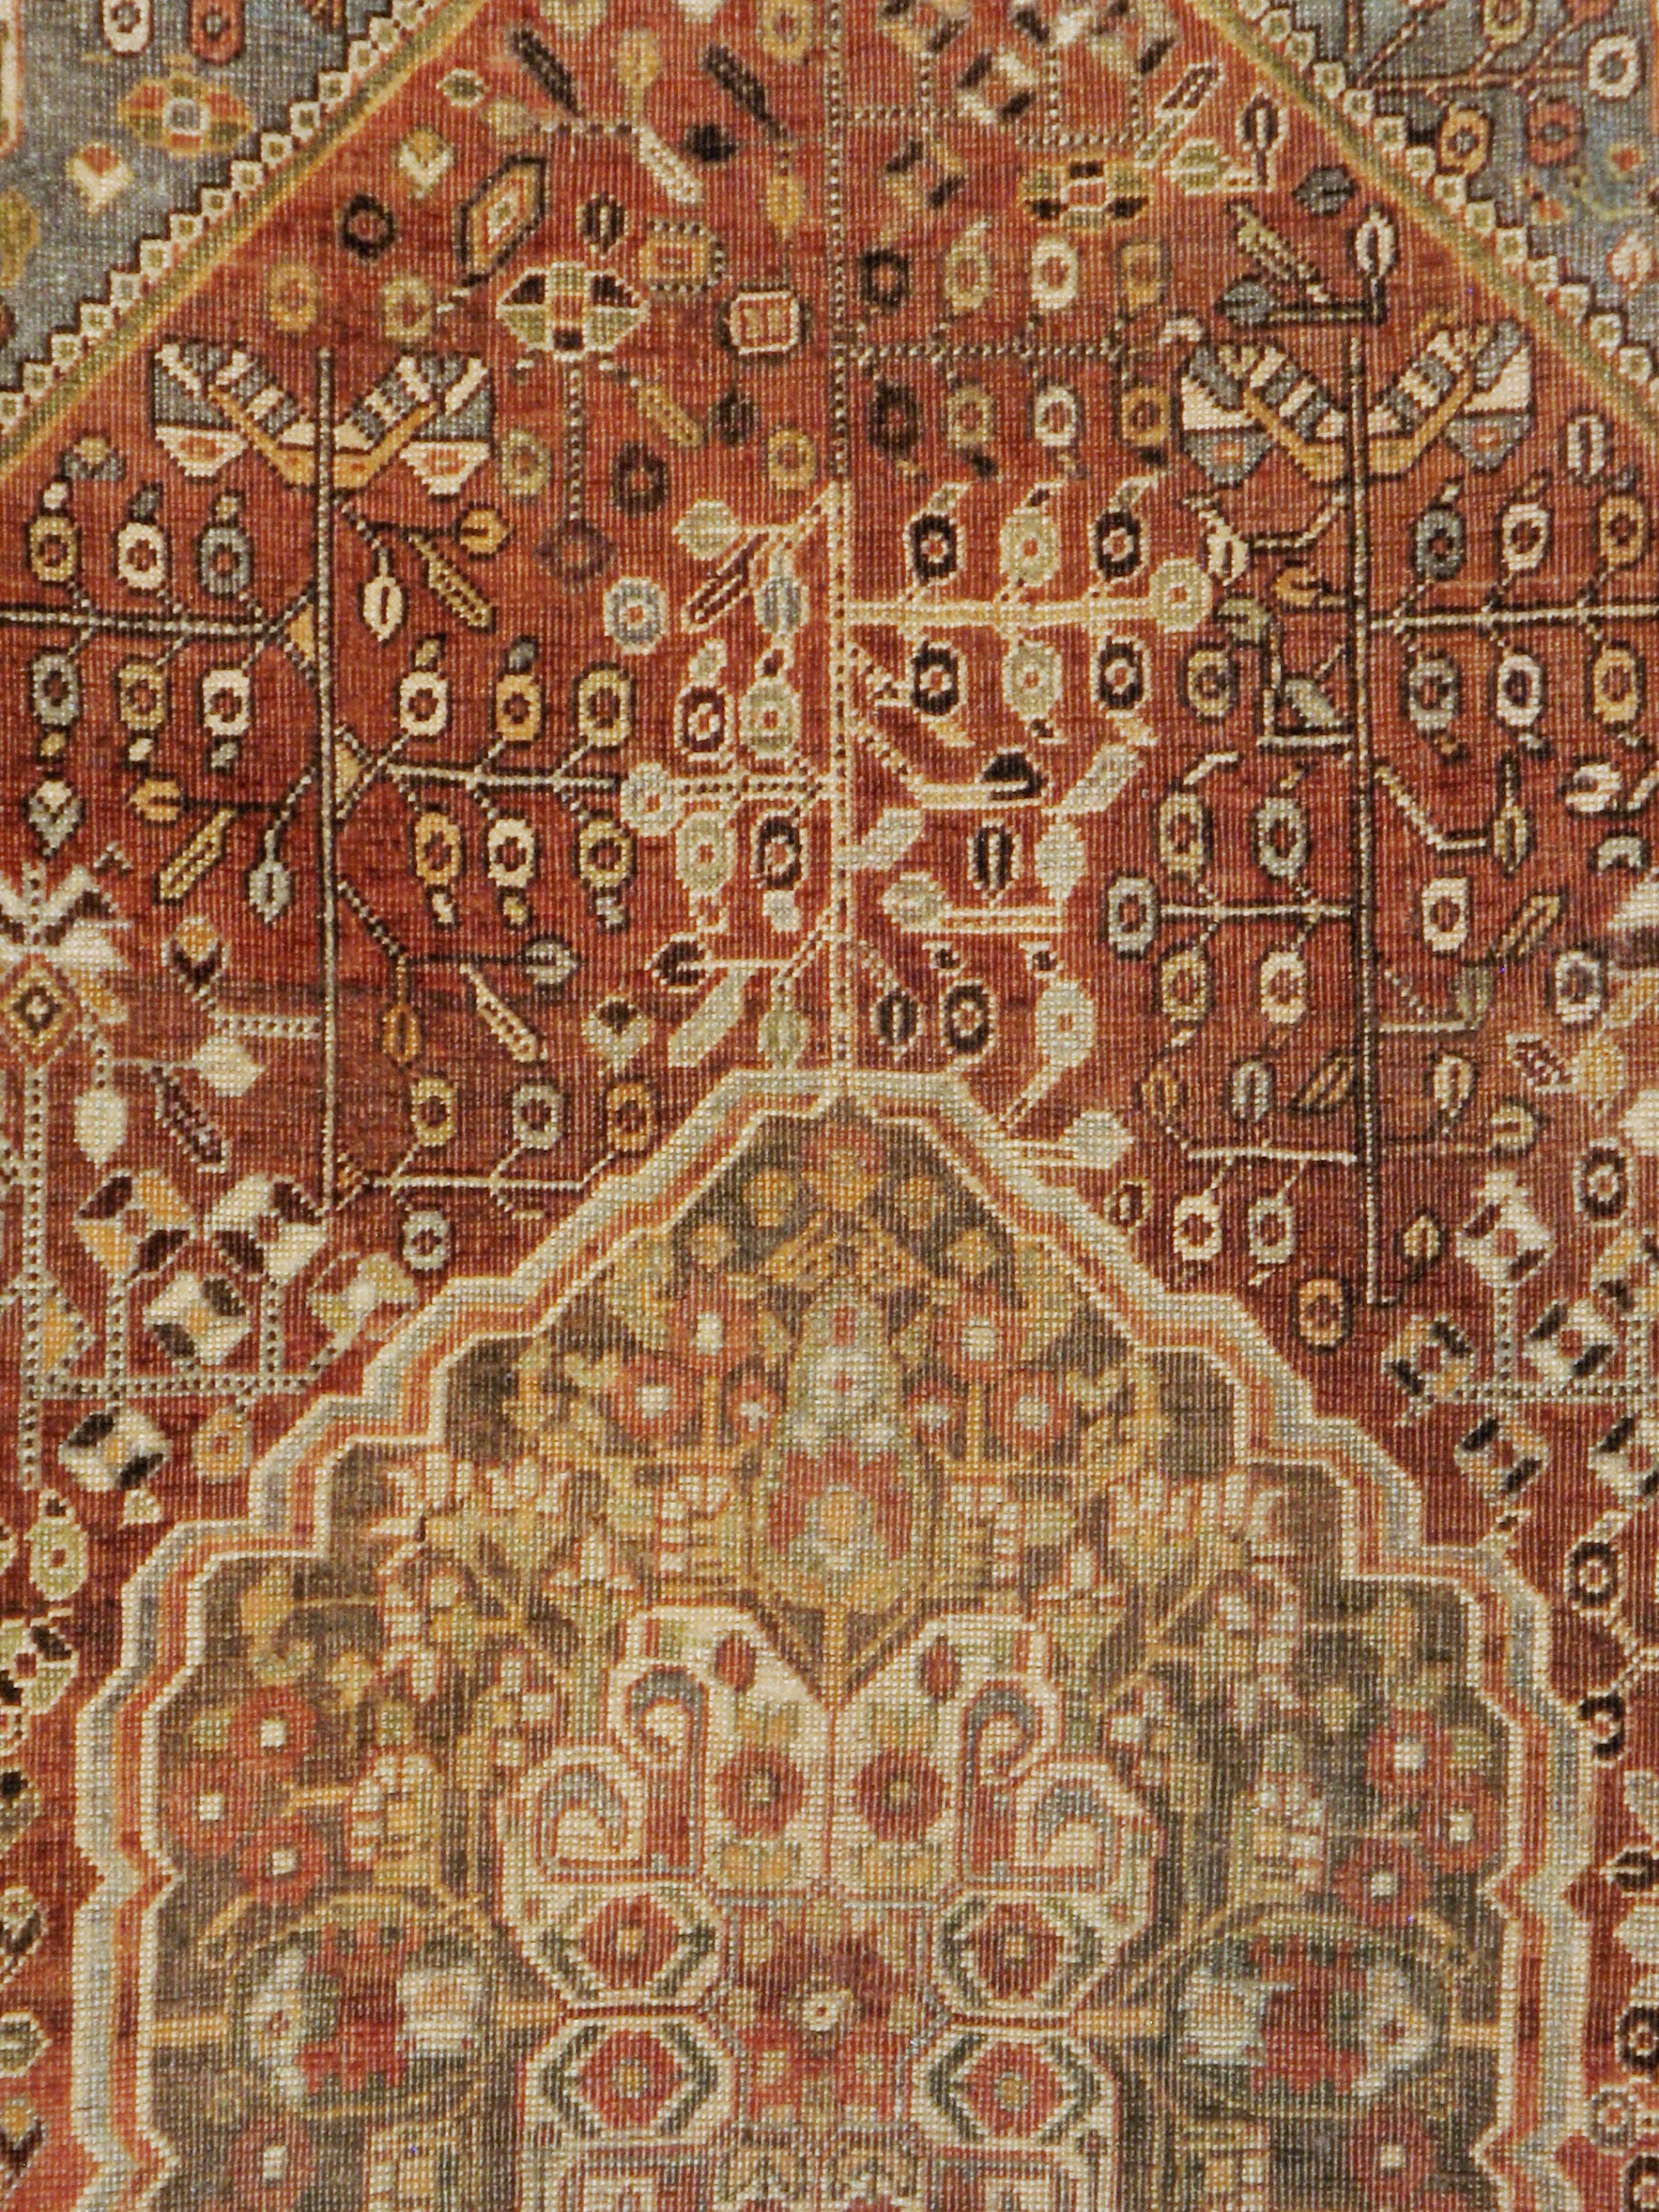 A vintage Persian Shiraz rug from the mid-20th century.

Measures: 5' 6